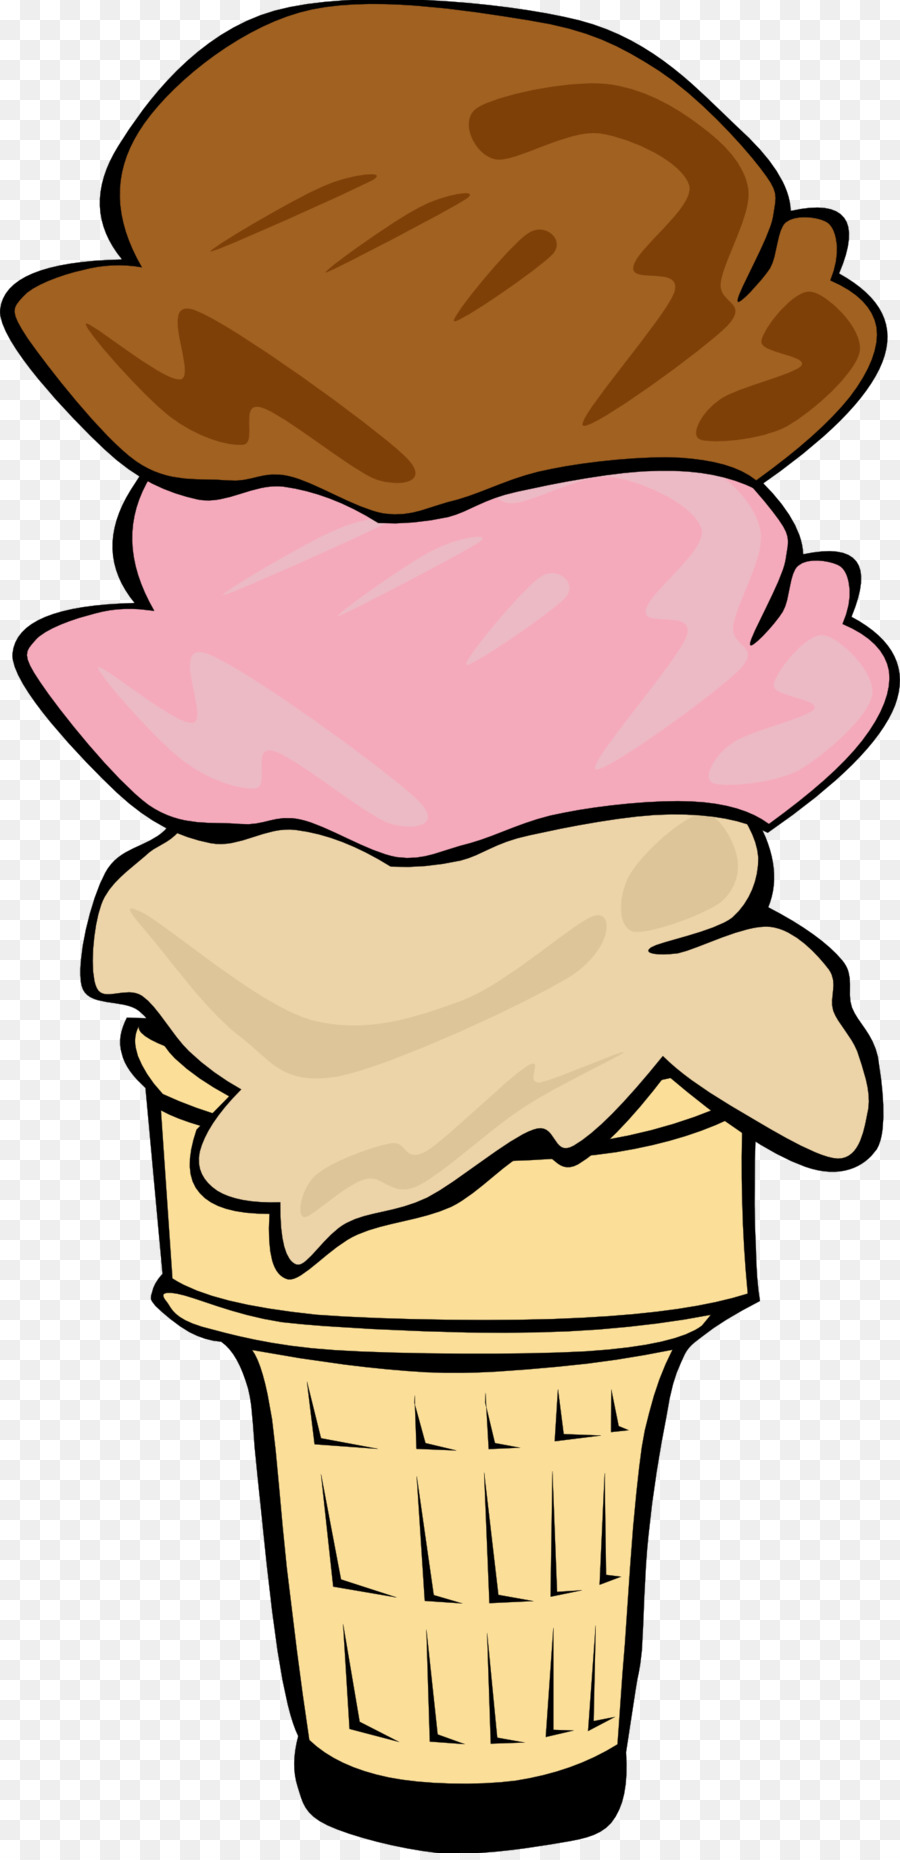 Ice cream cone Sundae Clip art - Ice Cliparts Transparent png download - 1331*2741 - Free Transparent Ice Cream png Download.